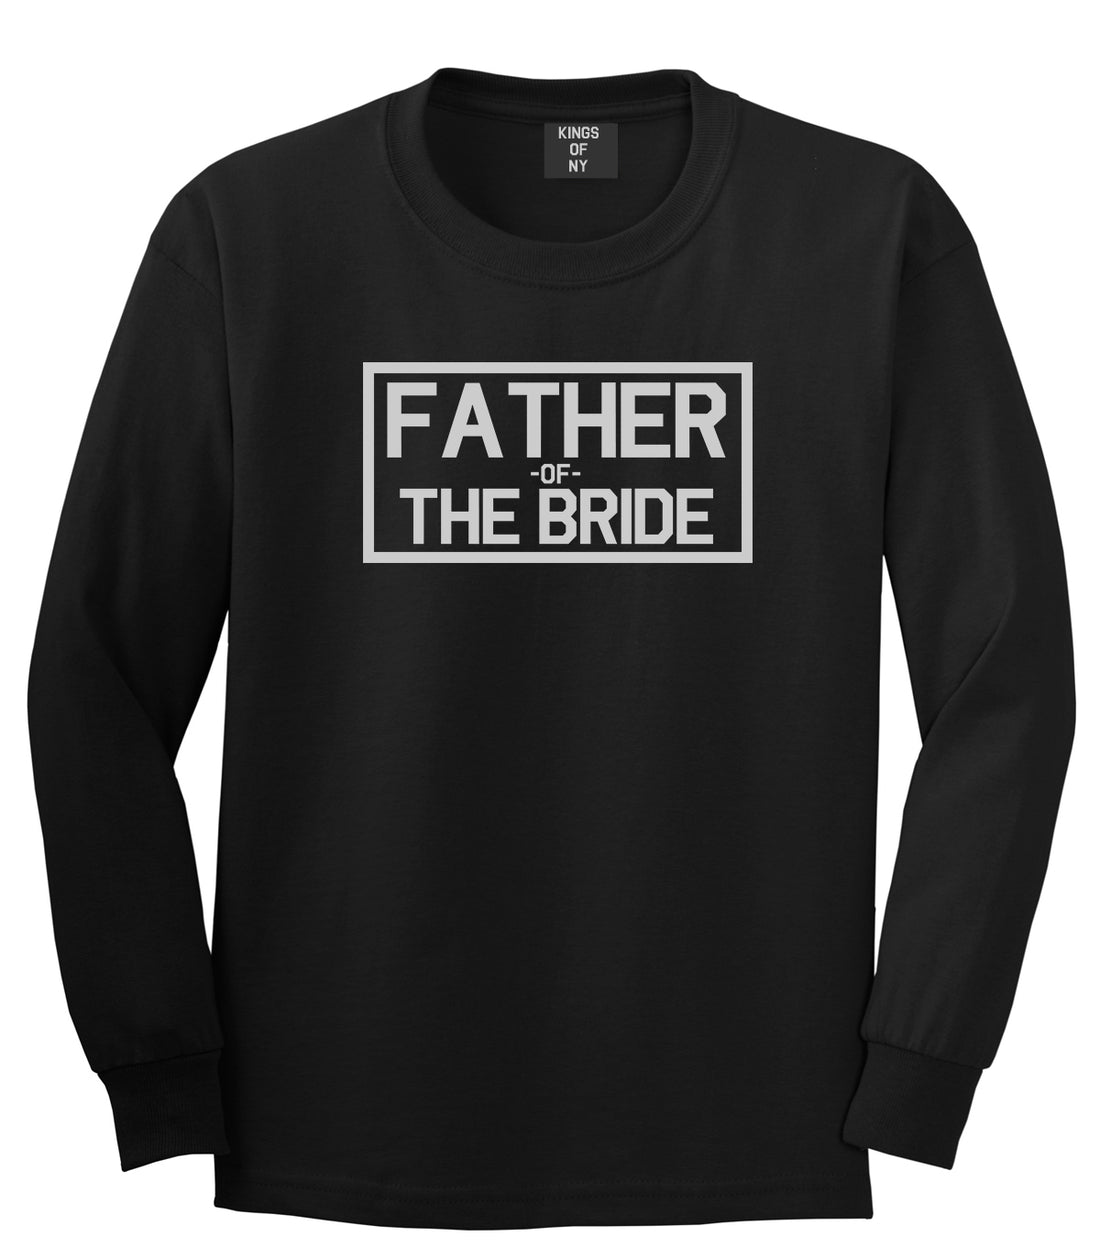 Father Of The Bride Mens Black Long Sleeve T-Shirt by Kings Of NY